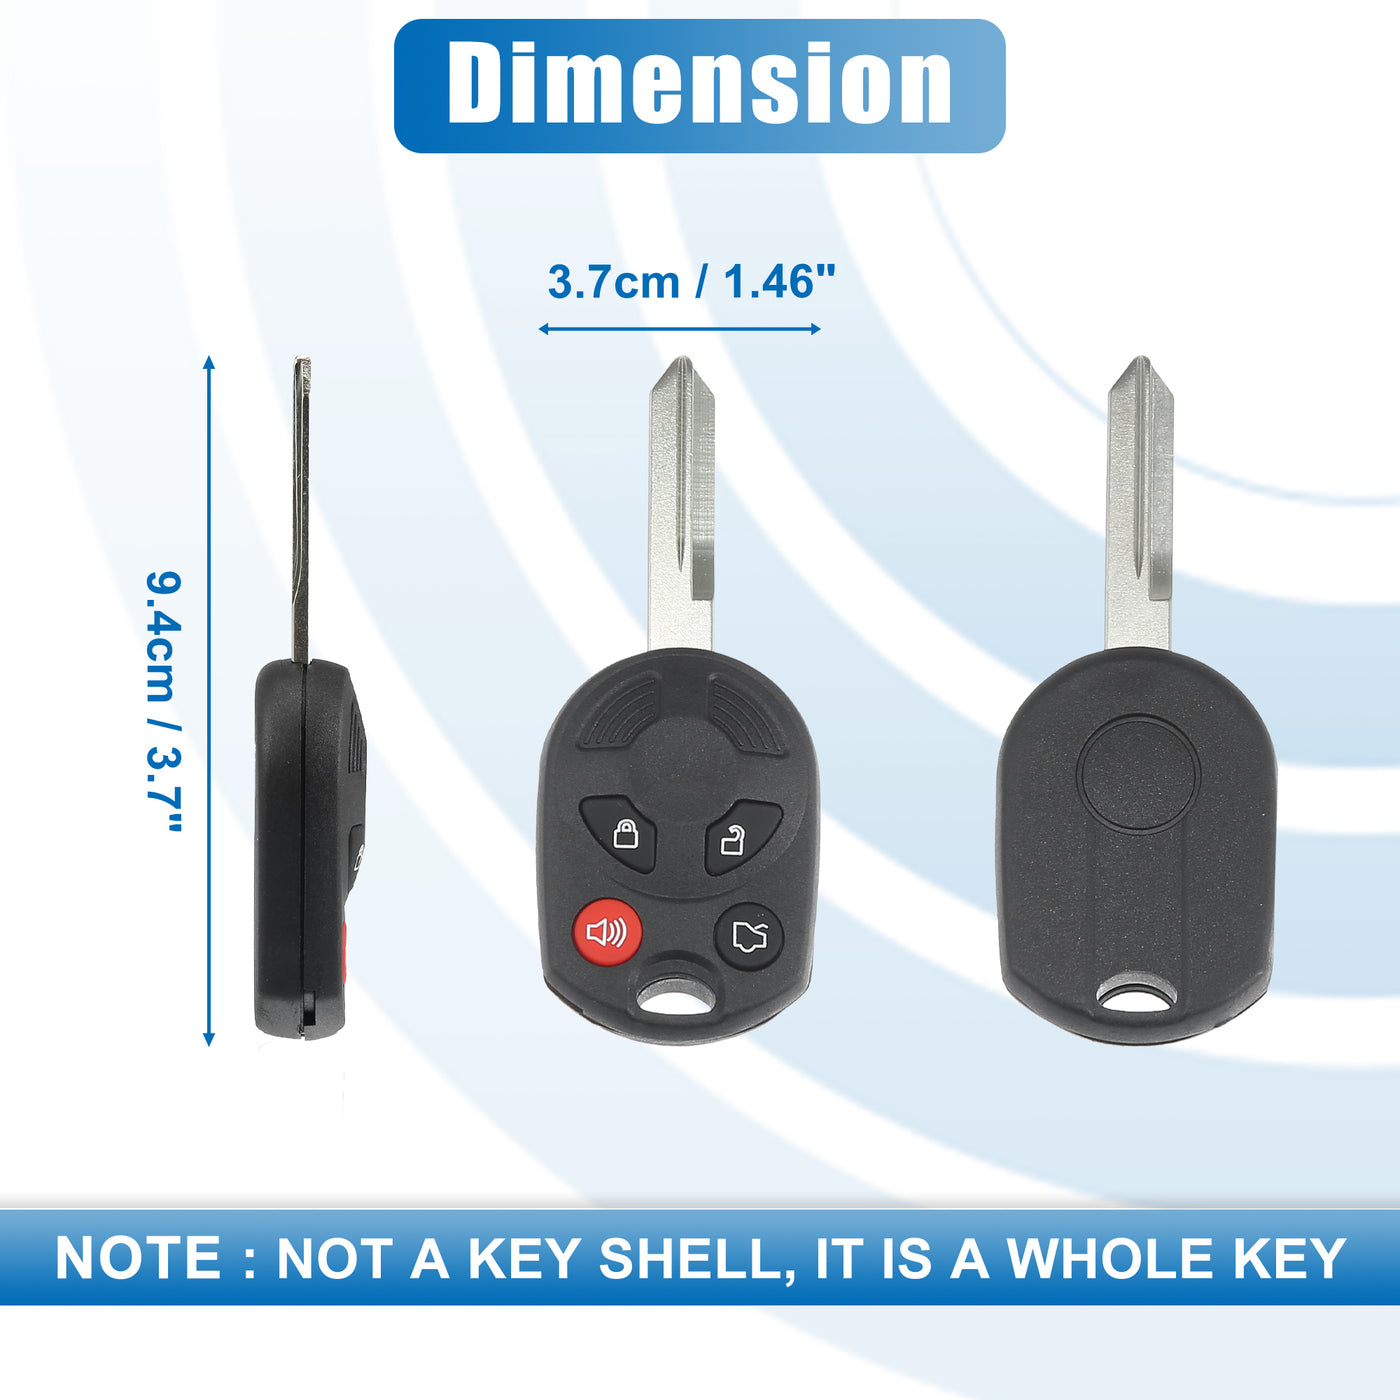 X AUTOHAUX 4 Button Car Keyless Entry Remote Control Replacement Key Fob Proximity Smart Fob OUCD6000022 for Ford Escape 2008-2010 315MHz Chip 63 80